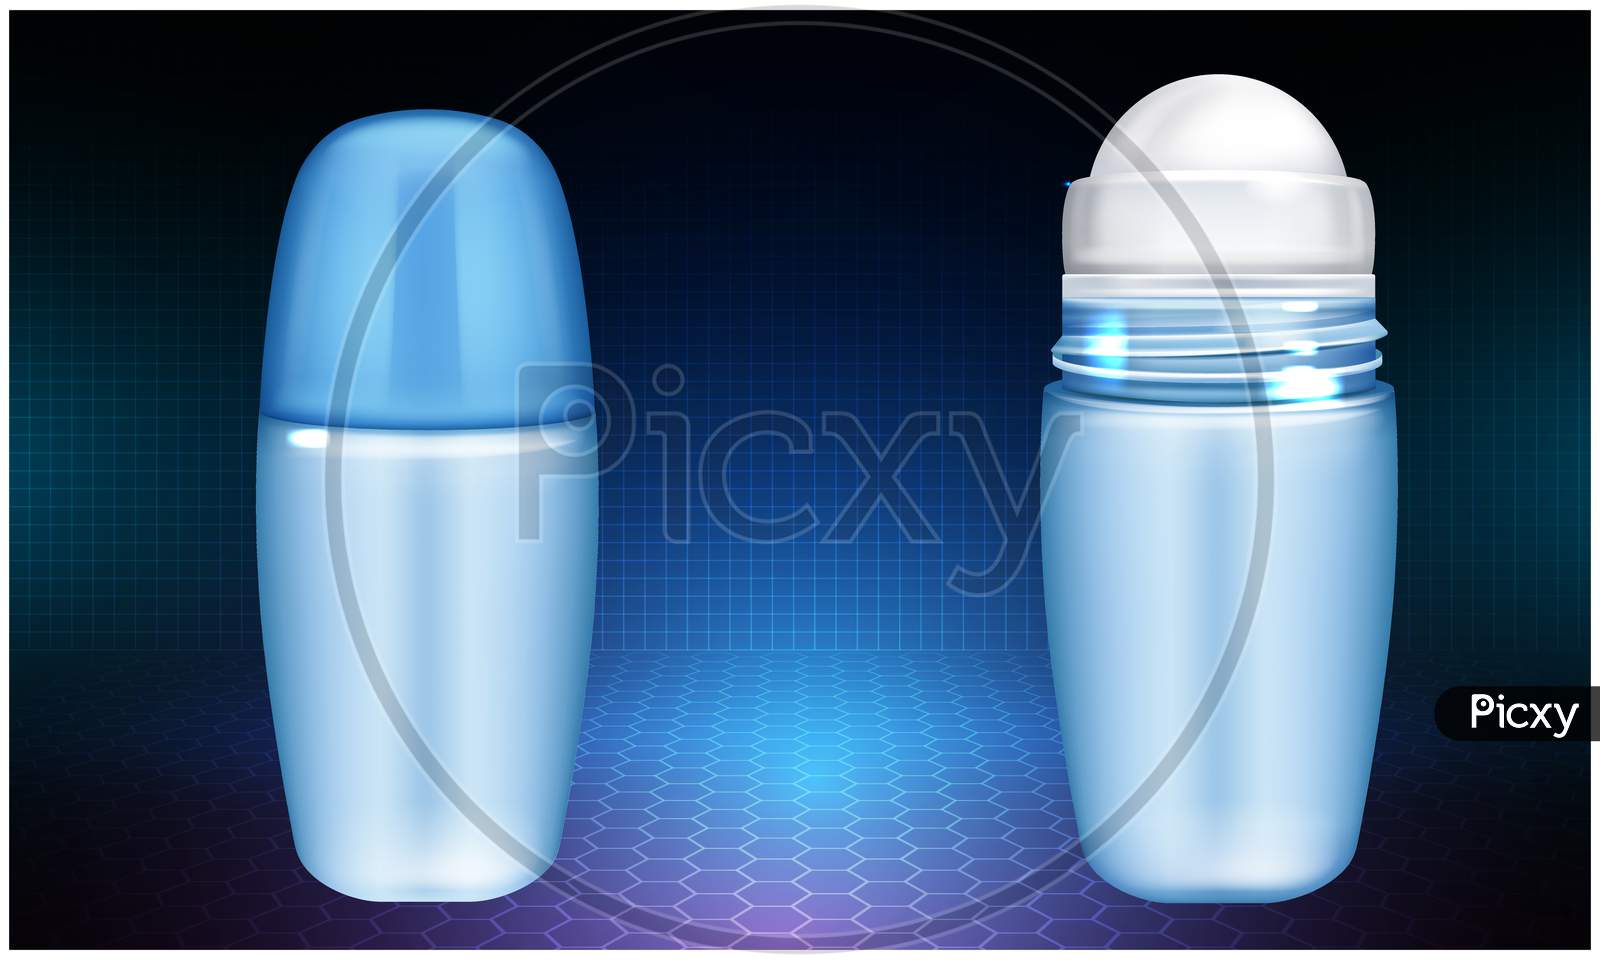 Mock Up Illustration Of Male Deodorant Perfume On Abstract Background